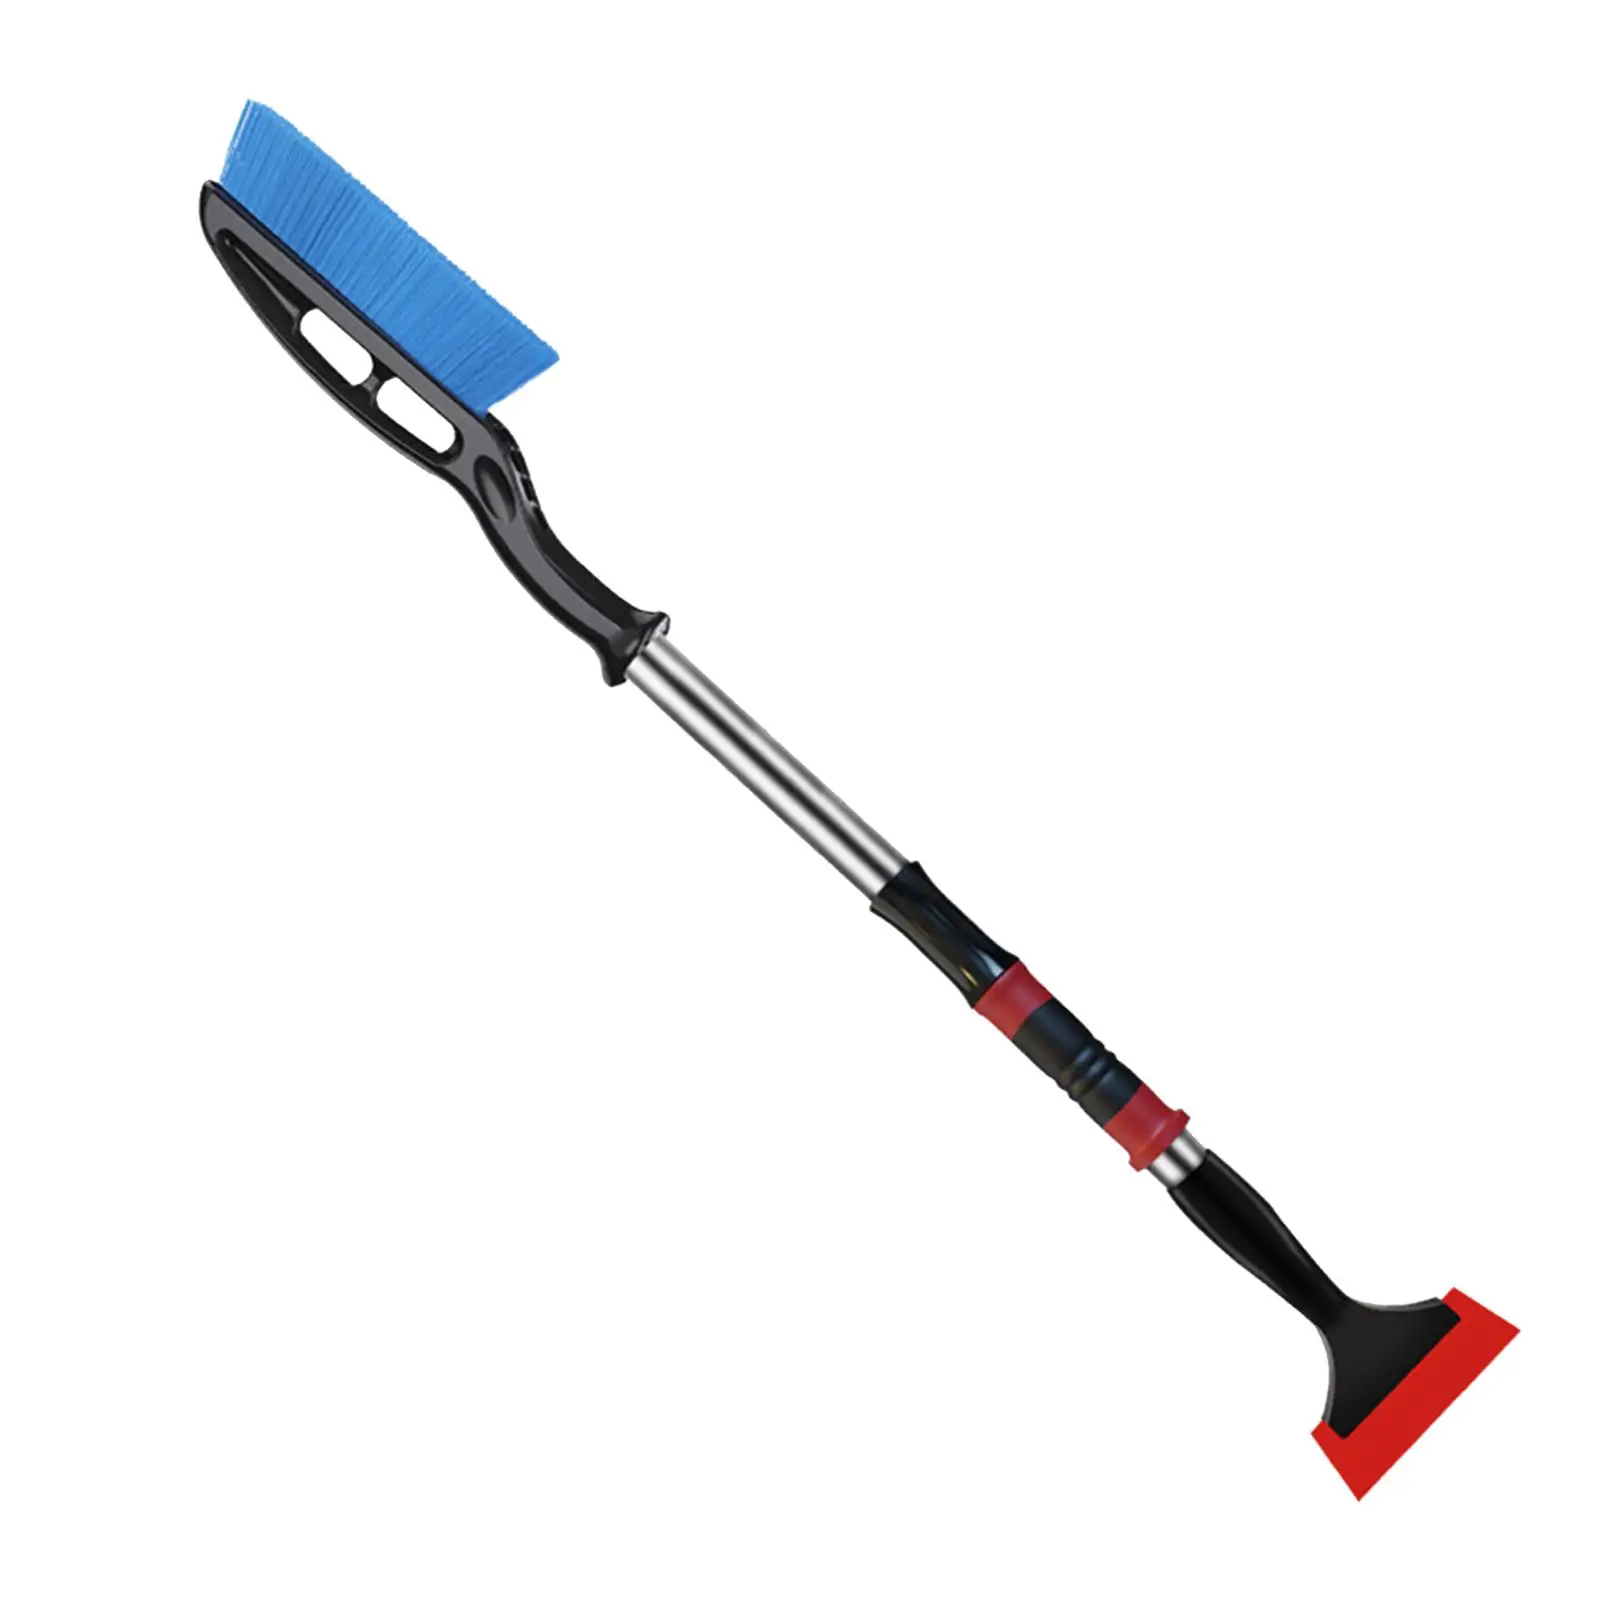 Car Snow Shovel Brush Tool Extendable Rod Winter Multipurpose Universal Snow Removal Snow Remover for Auto Truck SUV Car